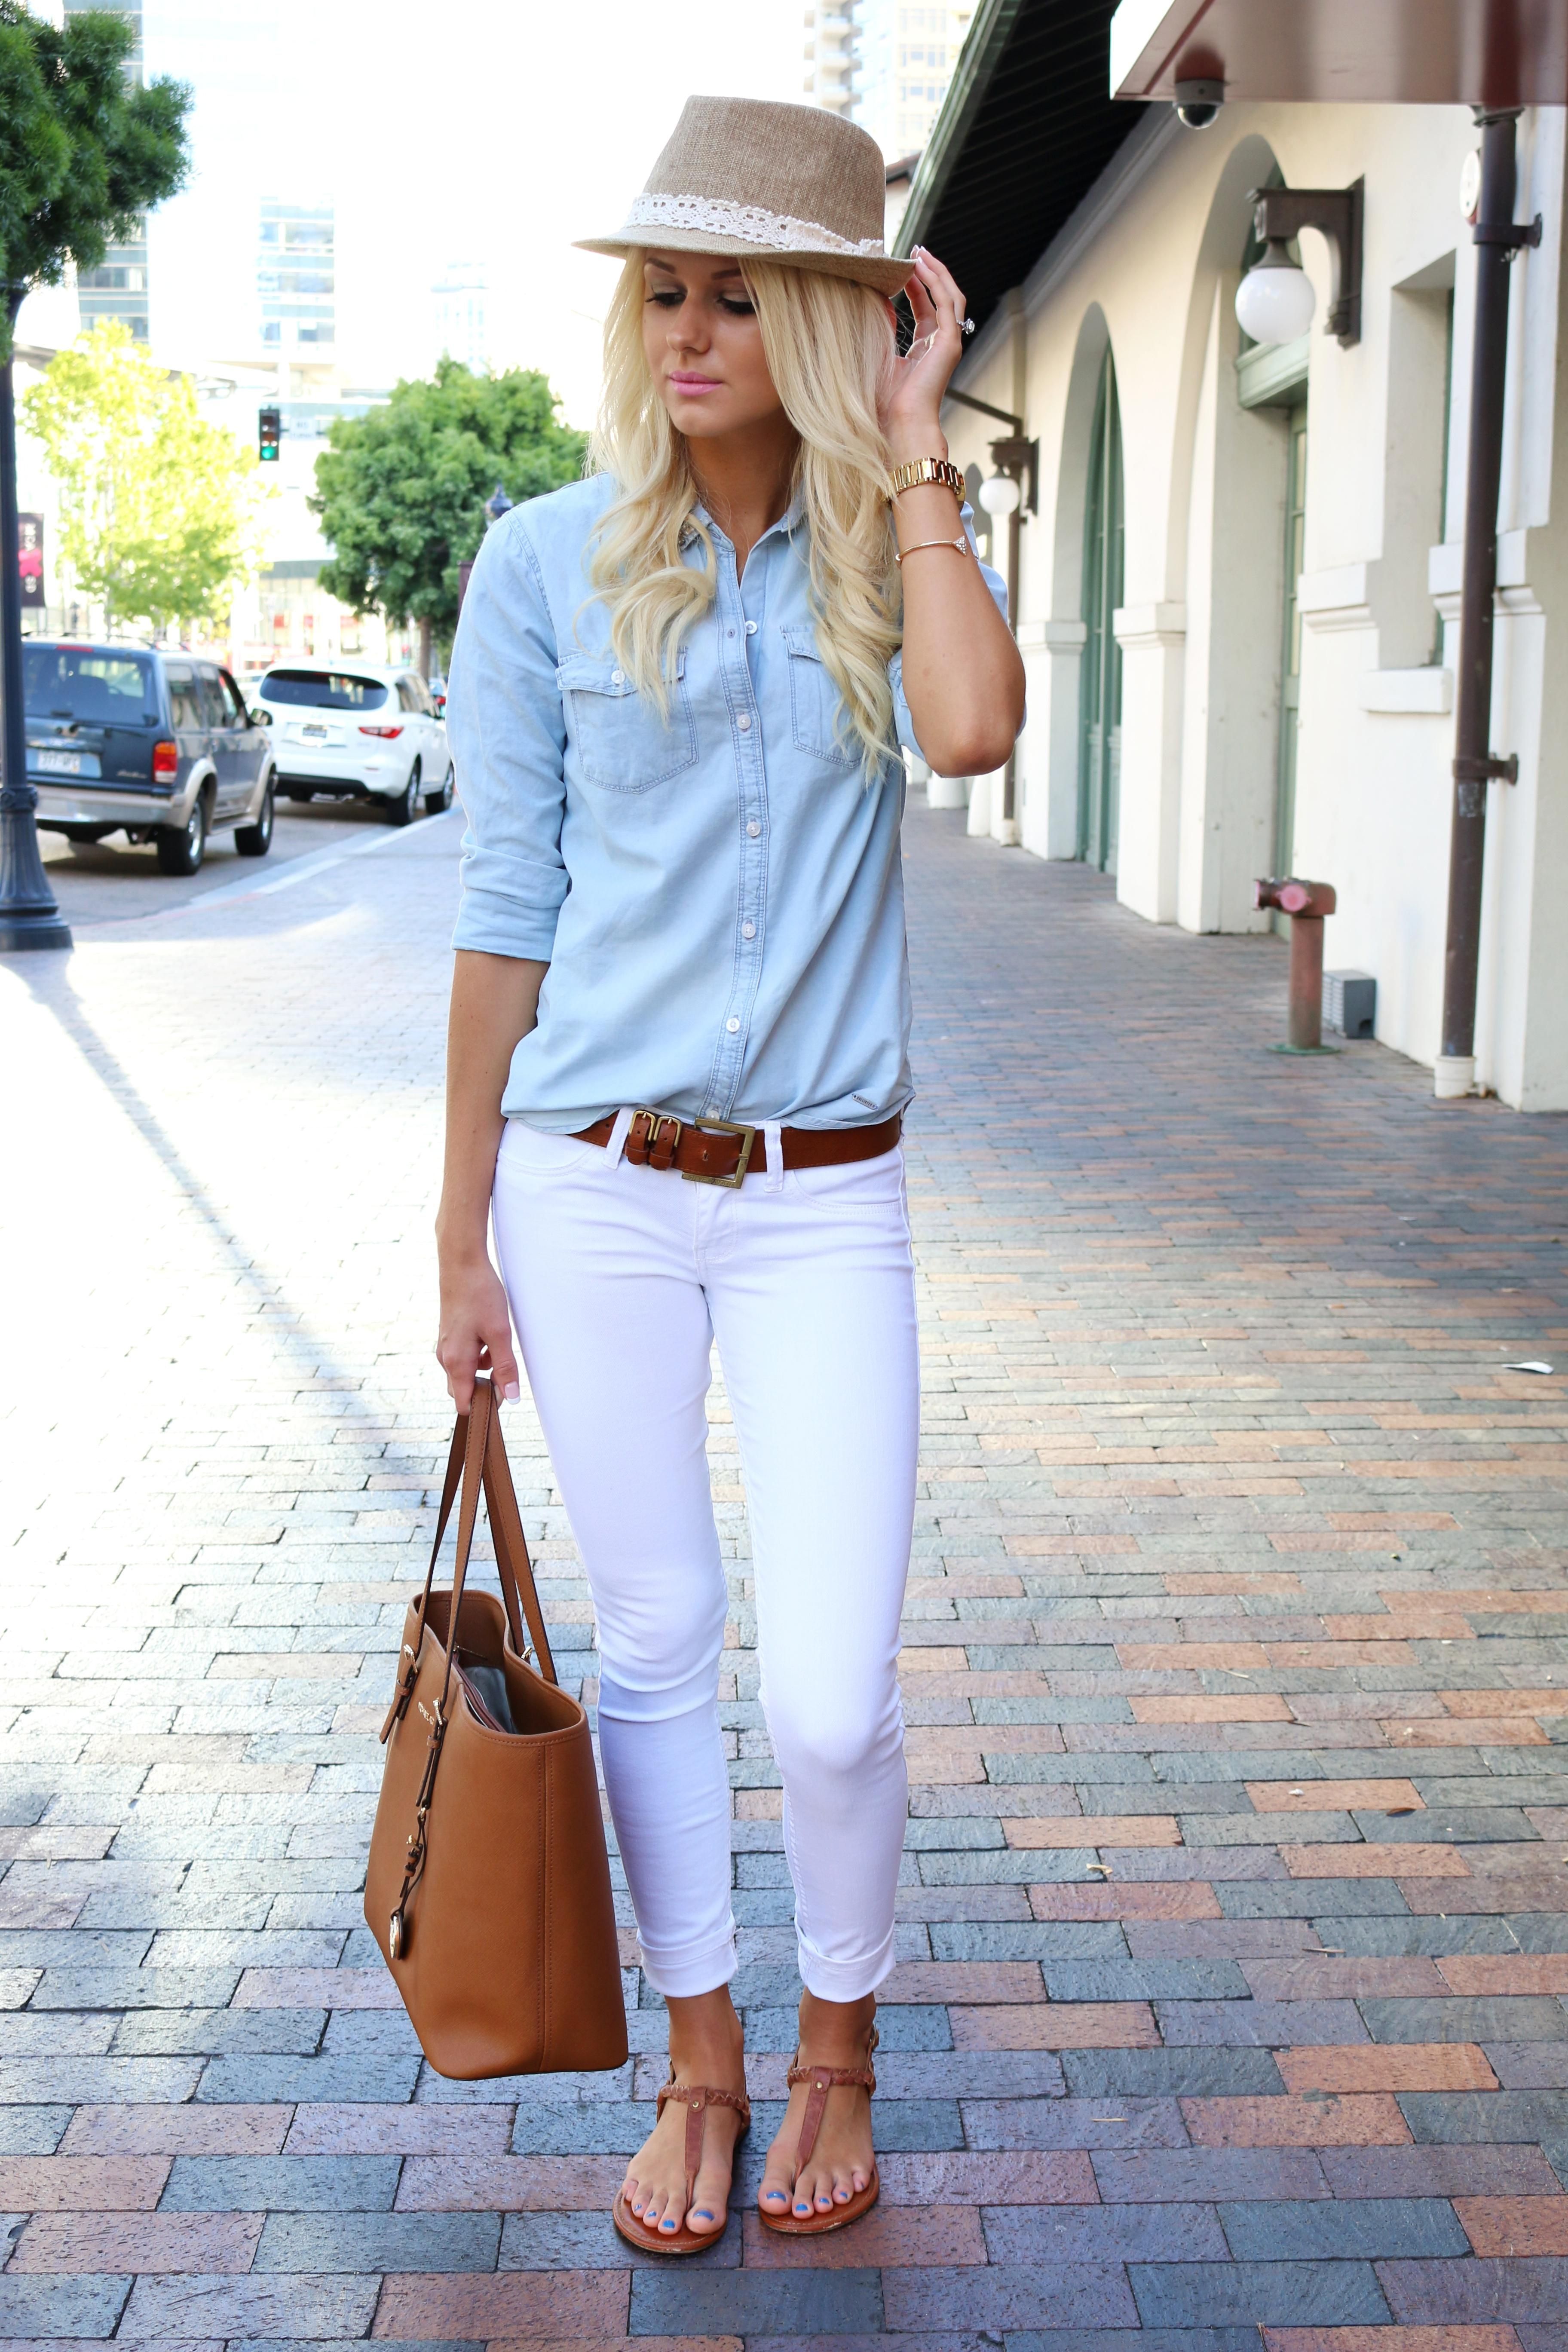 Summer Outfit Idea: White Jeans - chambray shirt tucked into belted  low-rise white jeans, worn with brown sandals + a lace embellished fedora